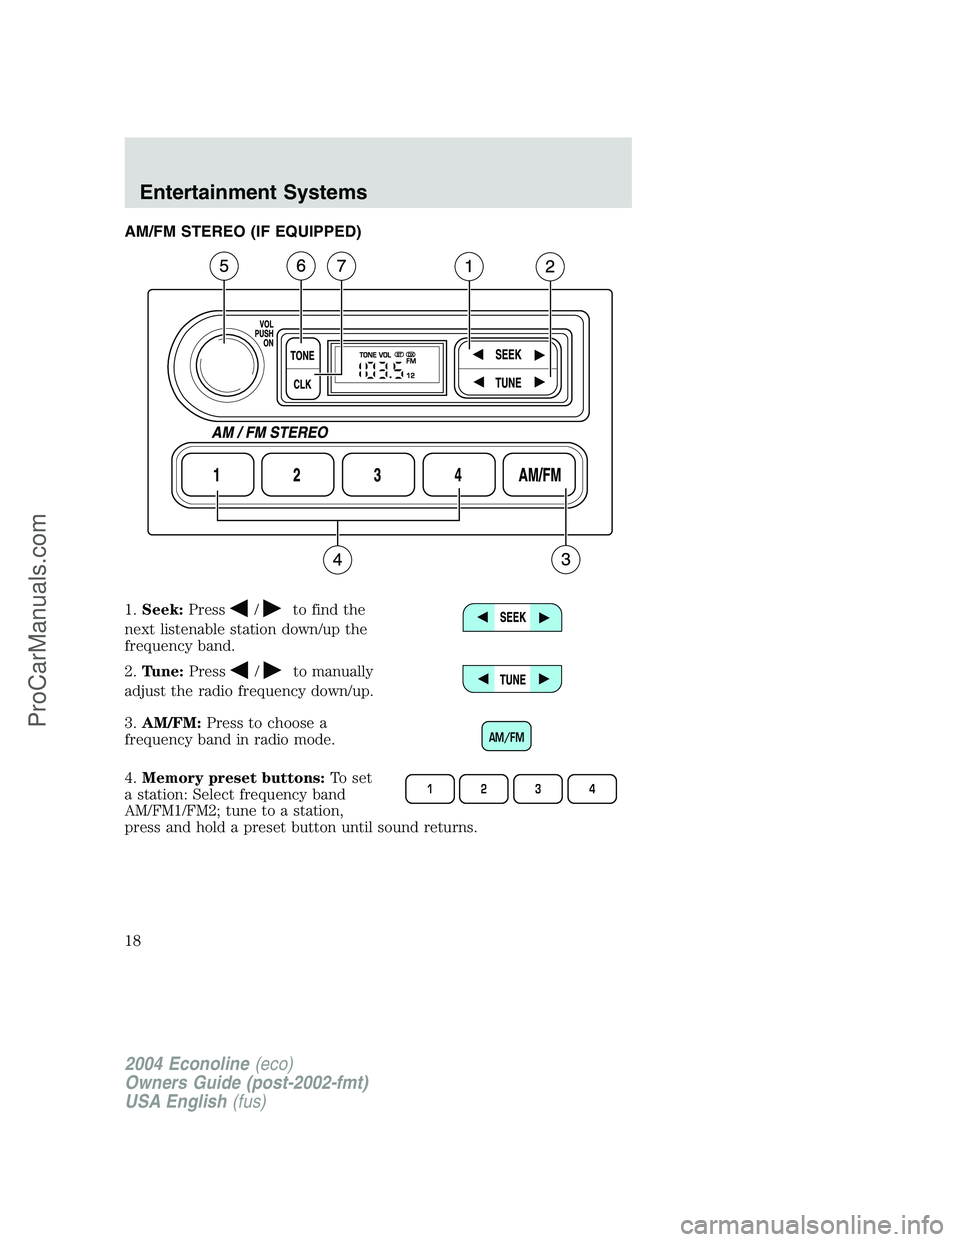 FORD E-350 2004  Owners Manual AM/FM STEREO (IF EQUIPPED)
1.Seek:Press
/to find the
next listenable station down/up the
frequency band.
2.Tune:Press
/to manually
adjust the radio frequency down/up.
3.AM/FM:Press to choose a
frequen